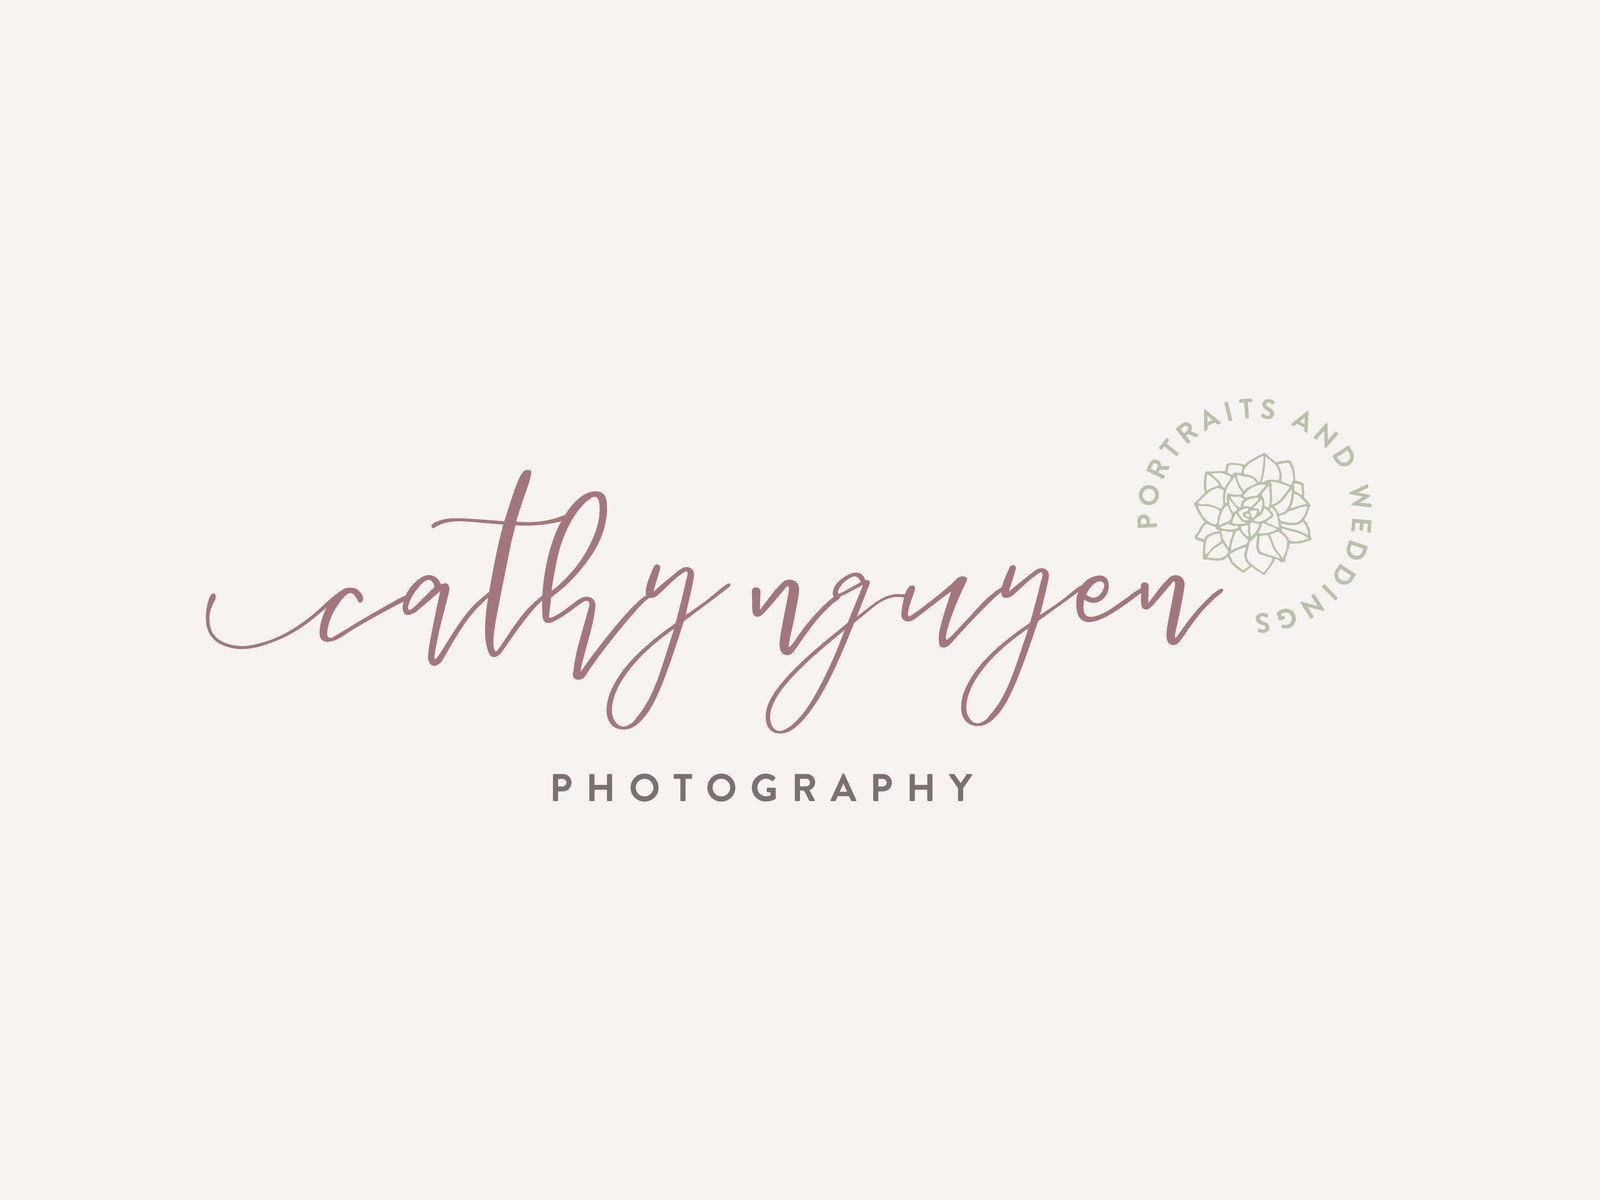 Cathy Nguyen Photography by Tara Mosier on Dribbble